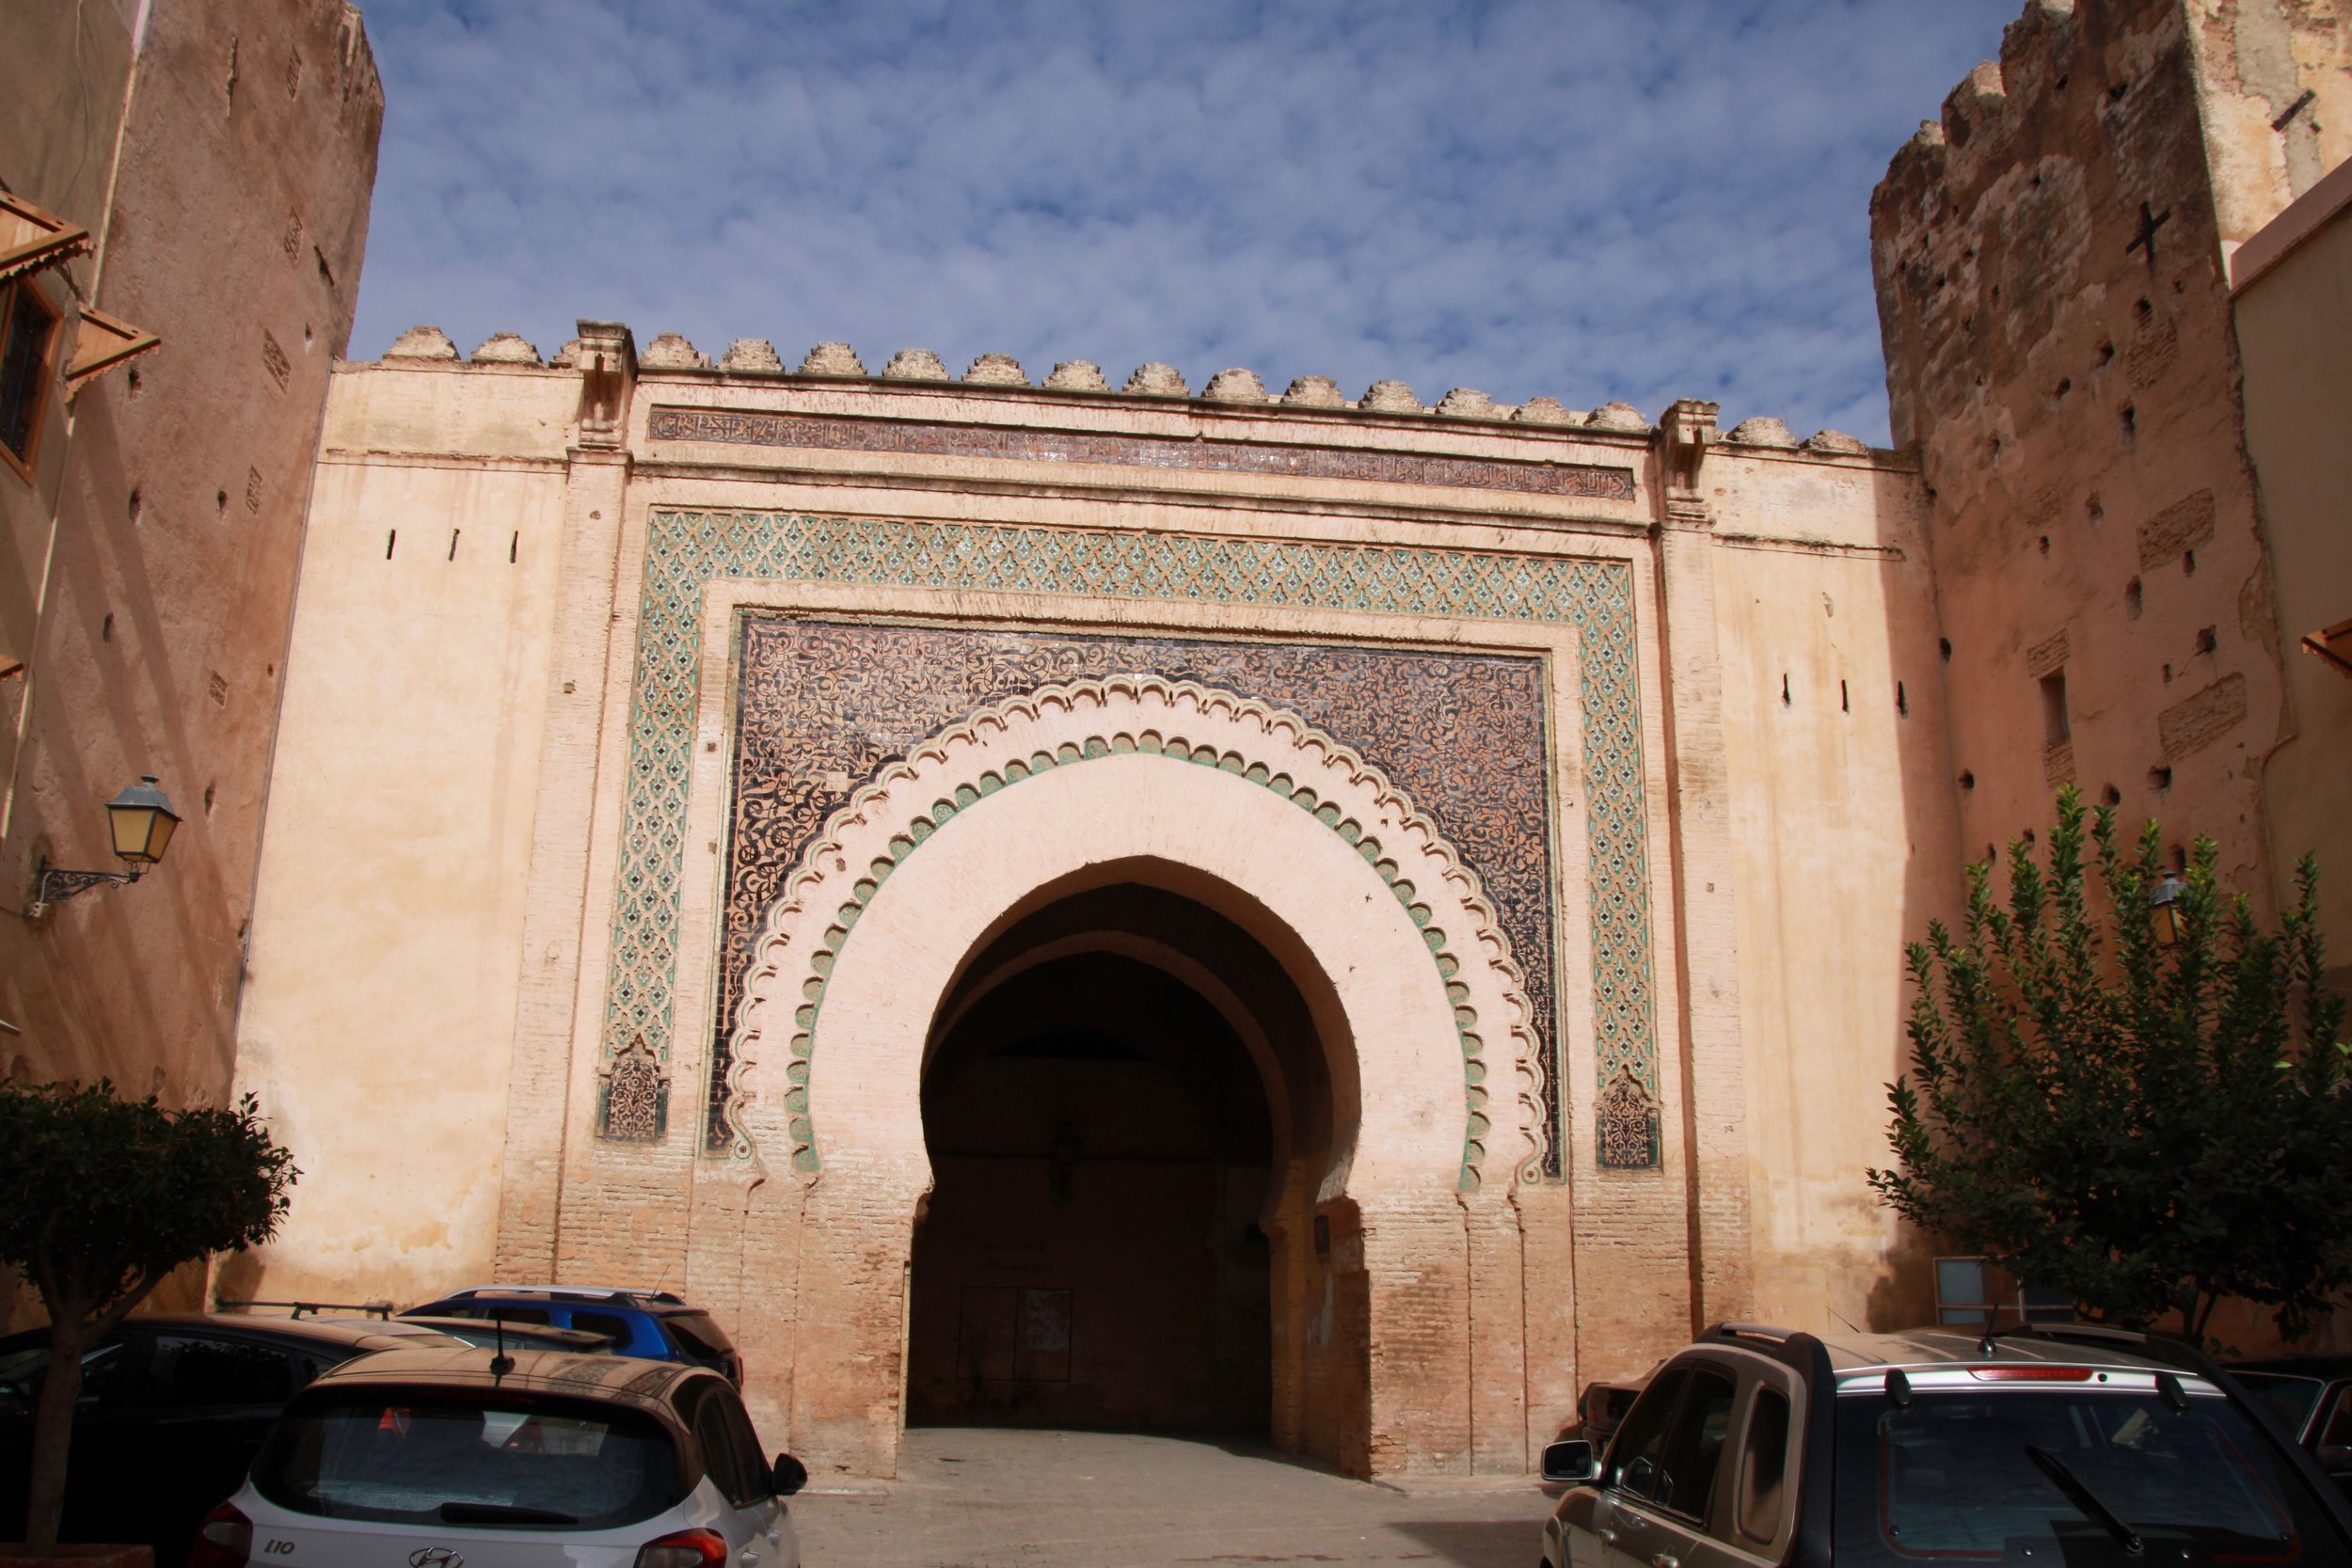  PICTURED: Not all of Meknes’ architectural gems are within the walled fort, and instead can be found within the surrounding medinas. PC: Andrew Corbley © 